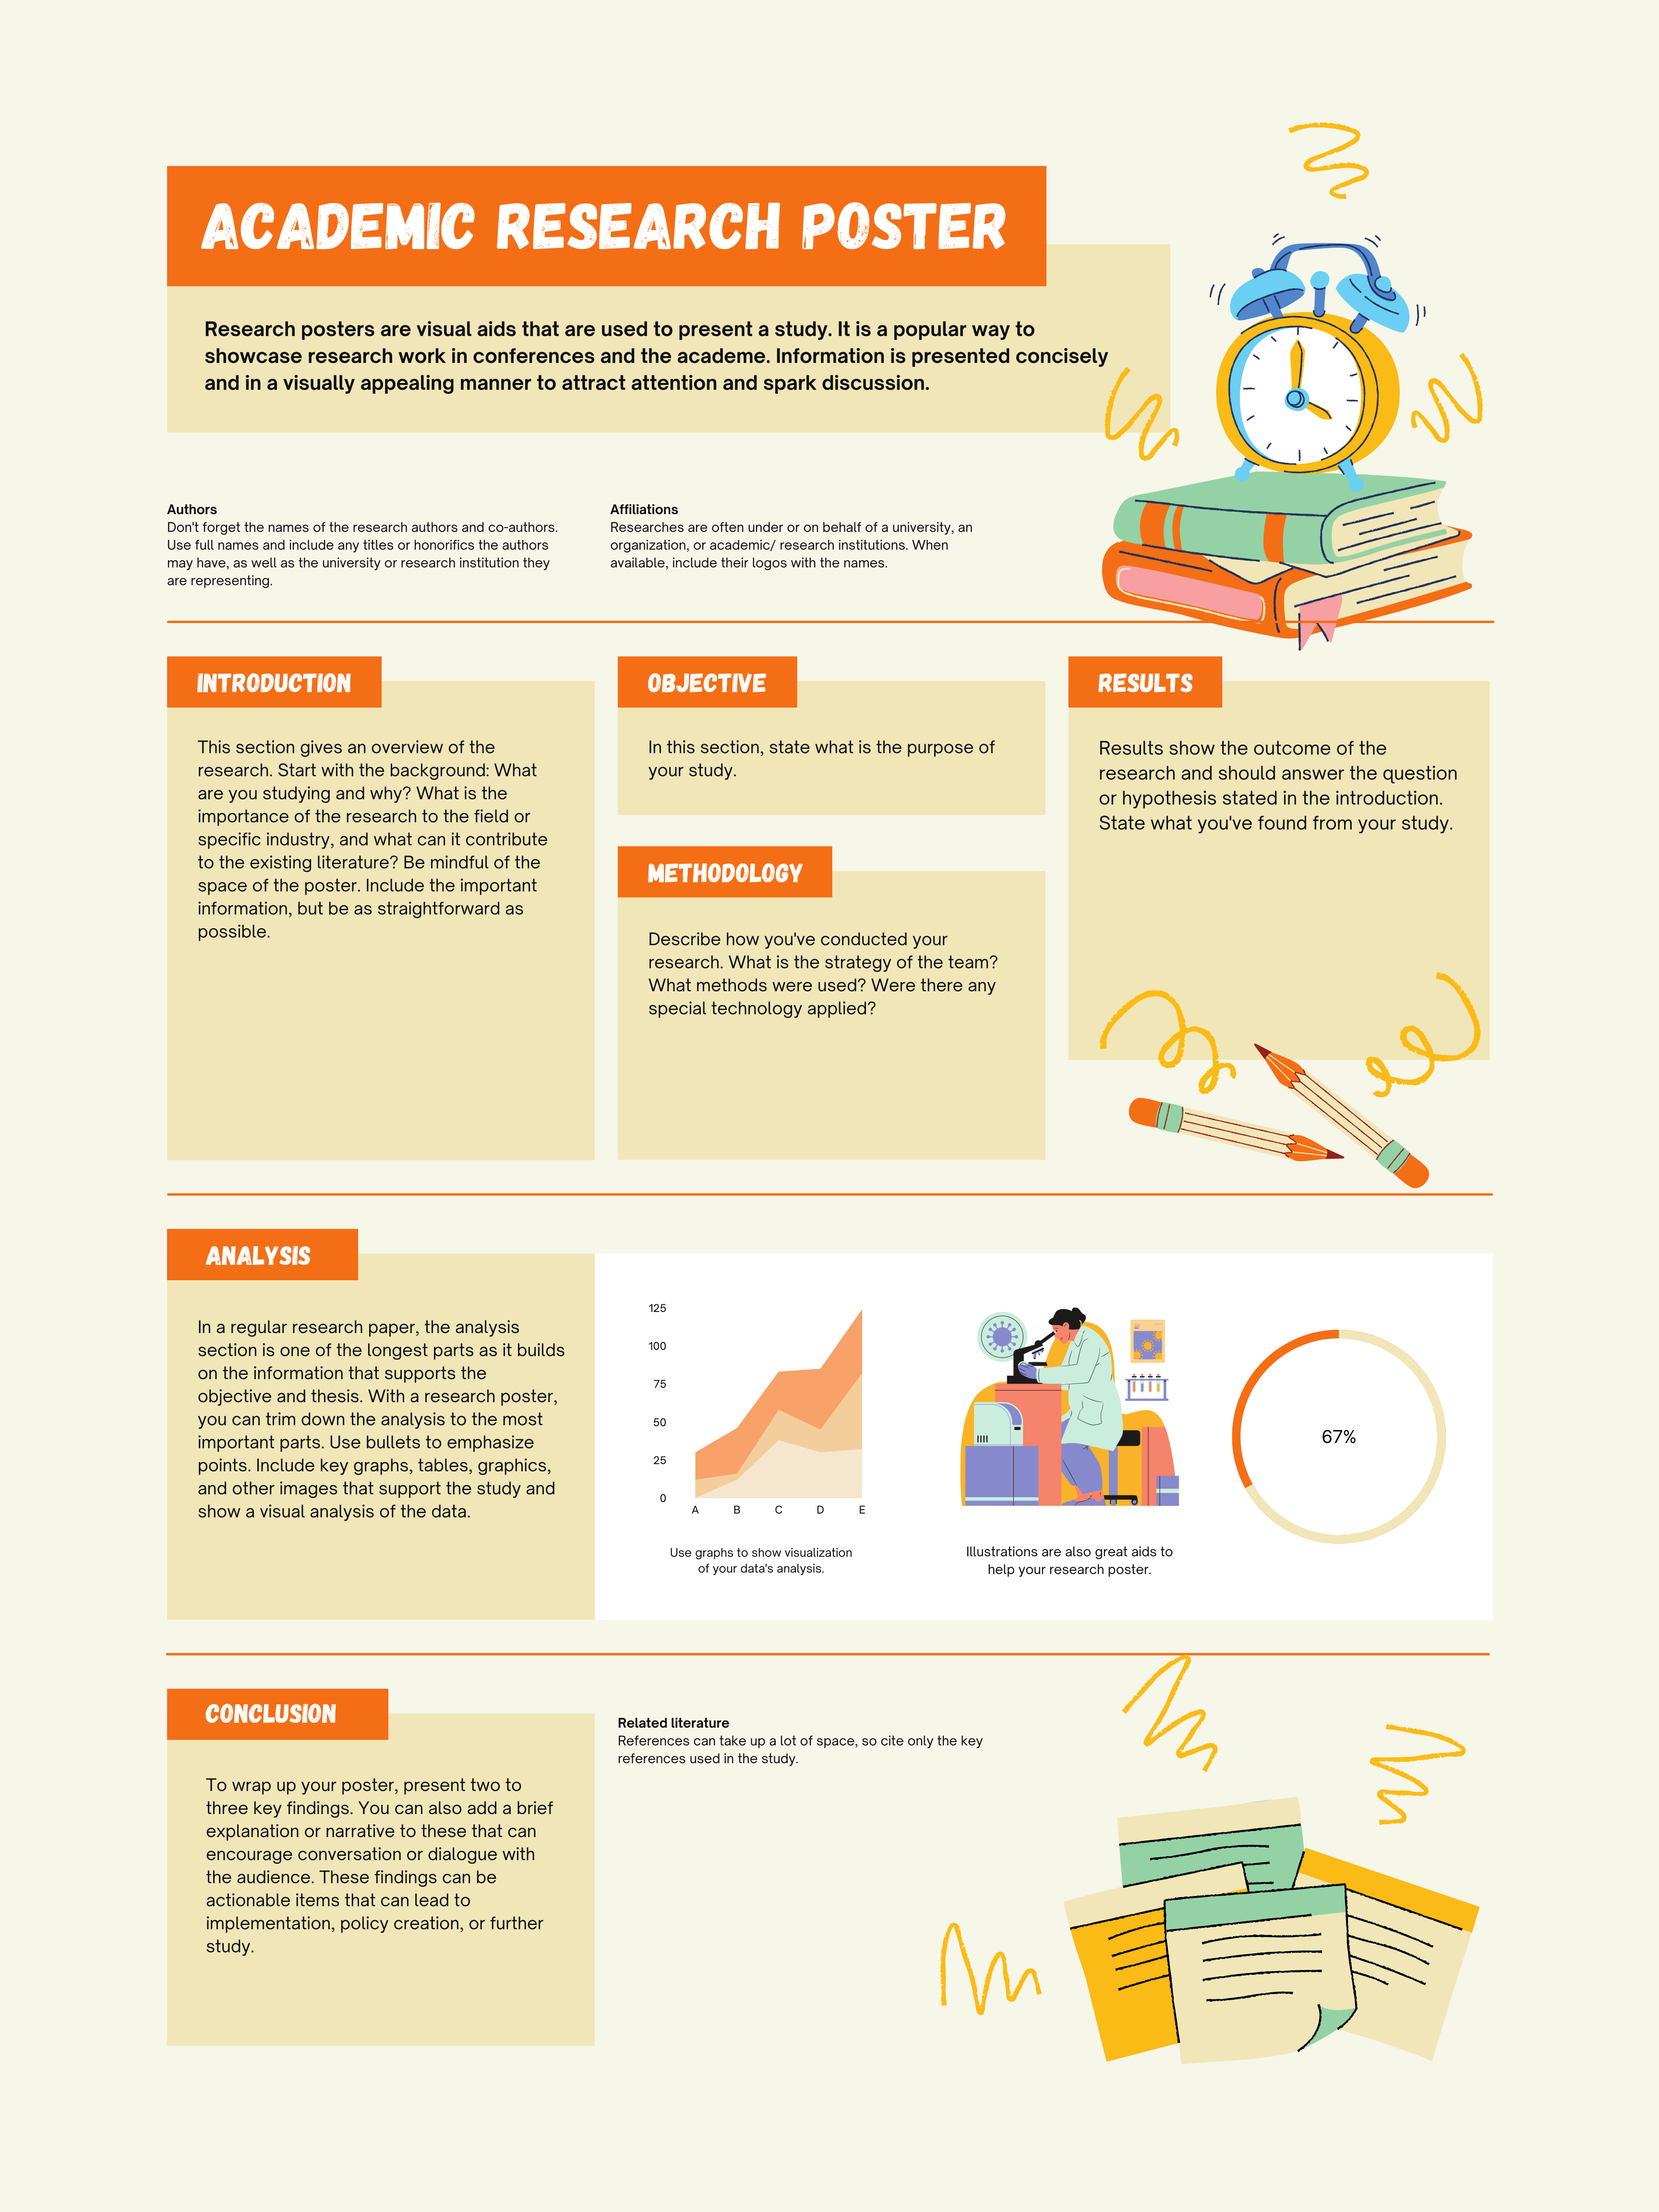 The picture shows the lay-out of an academic poster. The background color is a soft yellow. On it are several darker yellow block for the different components such as author information, introduction, methods, results and conclusion. Titles and headings are in orange blocks. On the right-hand side of the poster different pictures and figures are placed to illustrate the content of the poster.